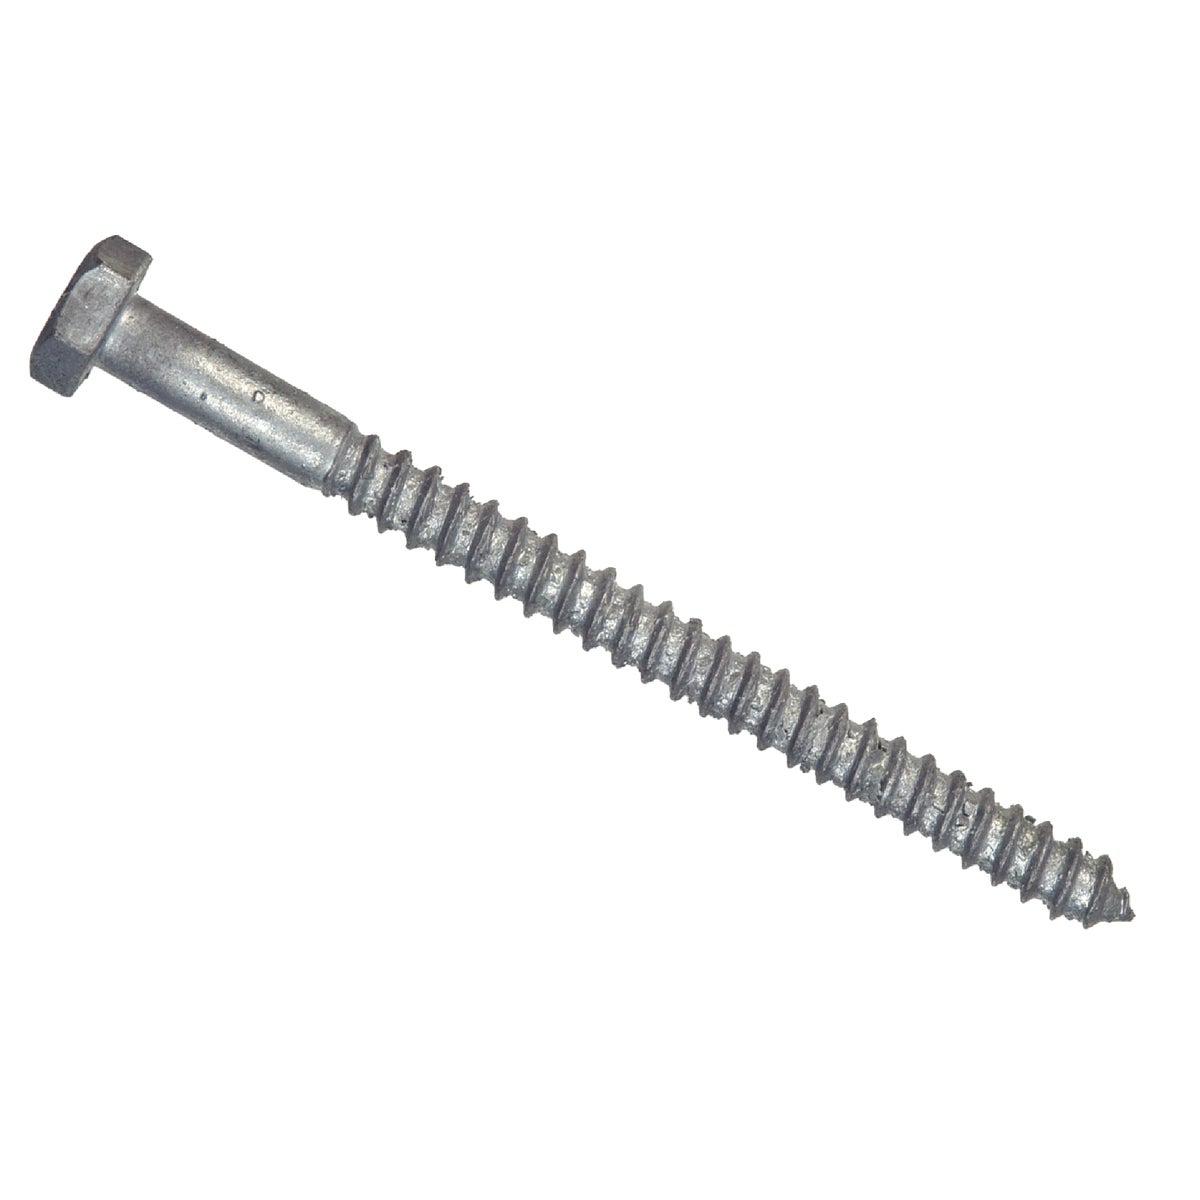 Item 723908, Hot galvanized lag screw with hex head and gimlet point.